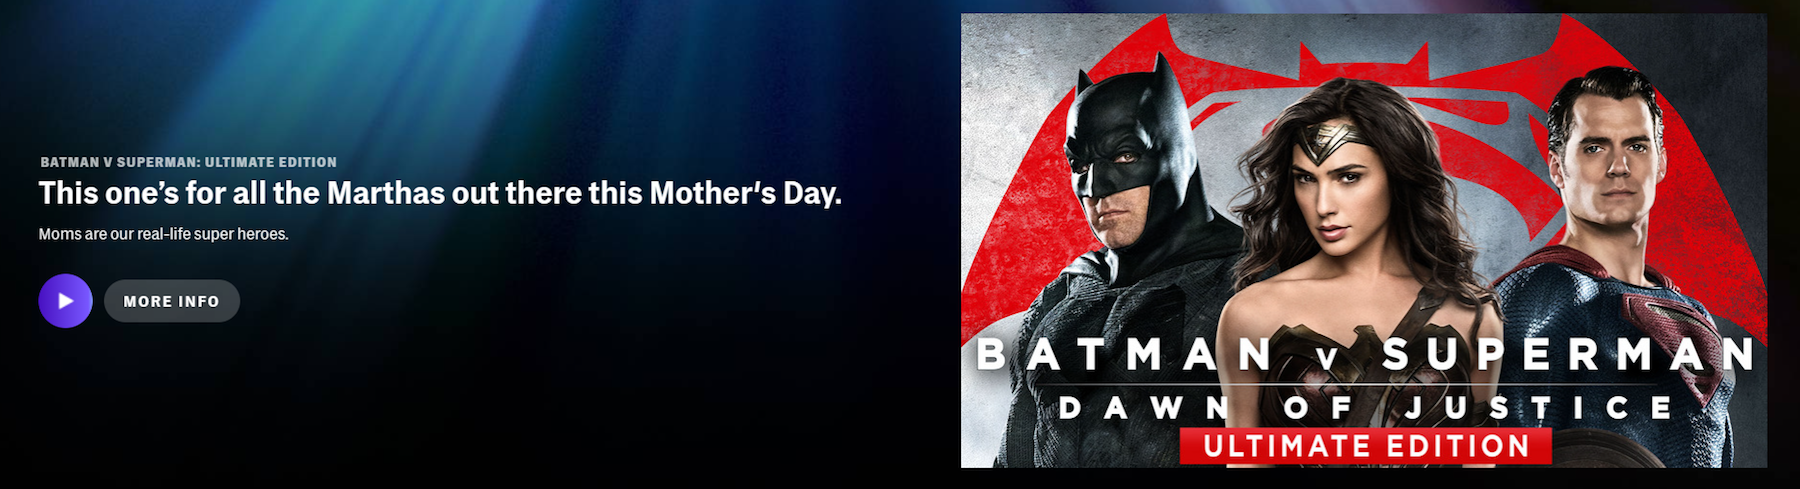 Batman v Superman HBO Max page Mothers Day message